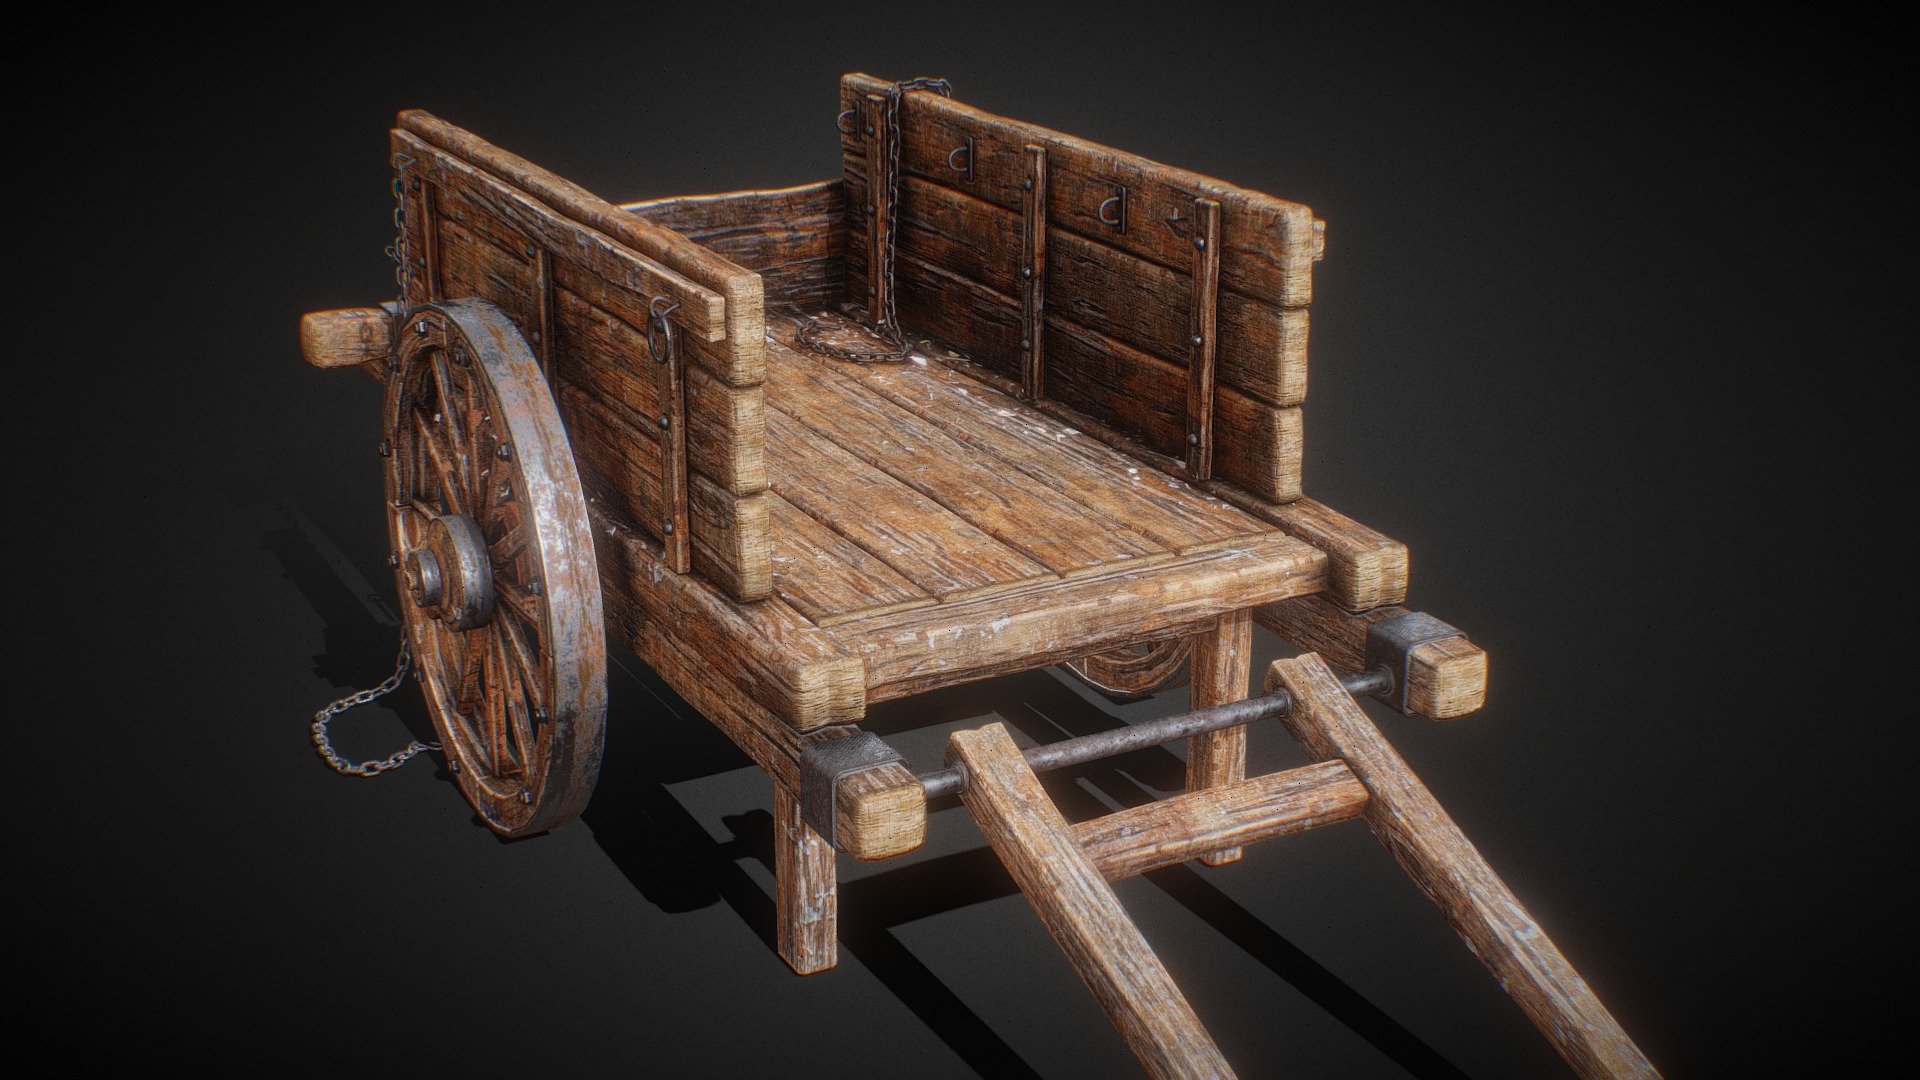 Old wooden wagon made from photo reference, modeled in Autodesk Maya, textured in Substance Painter, Hope you Like it!!
Feel Free to DM me for more 3d model